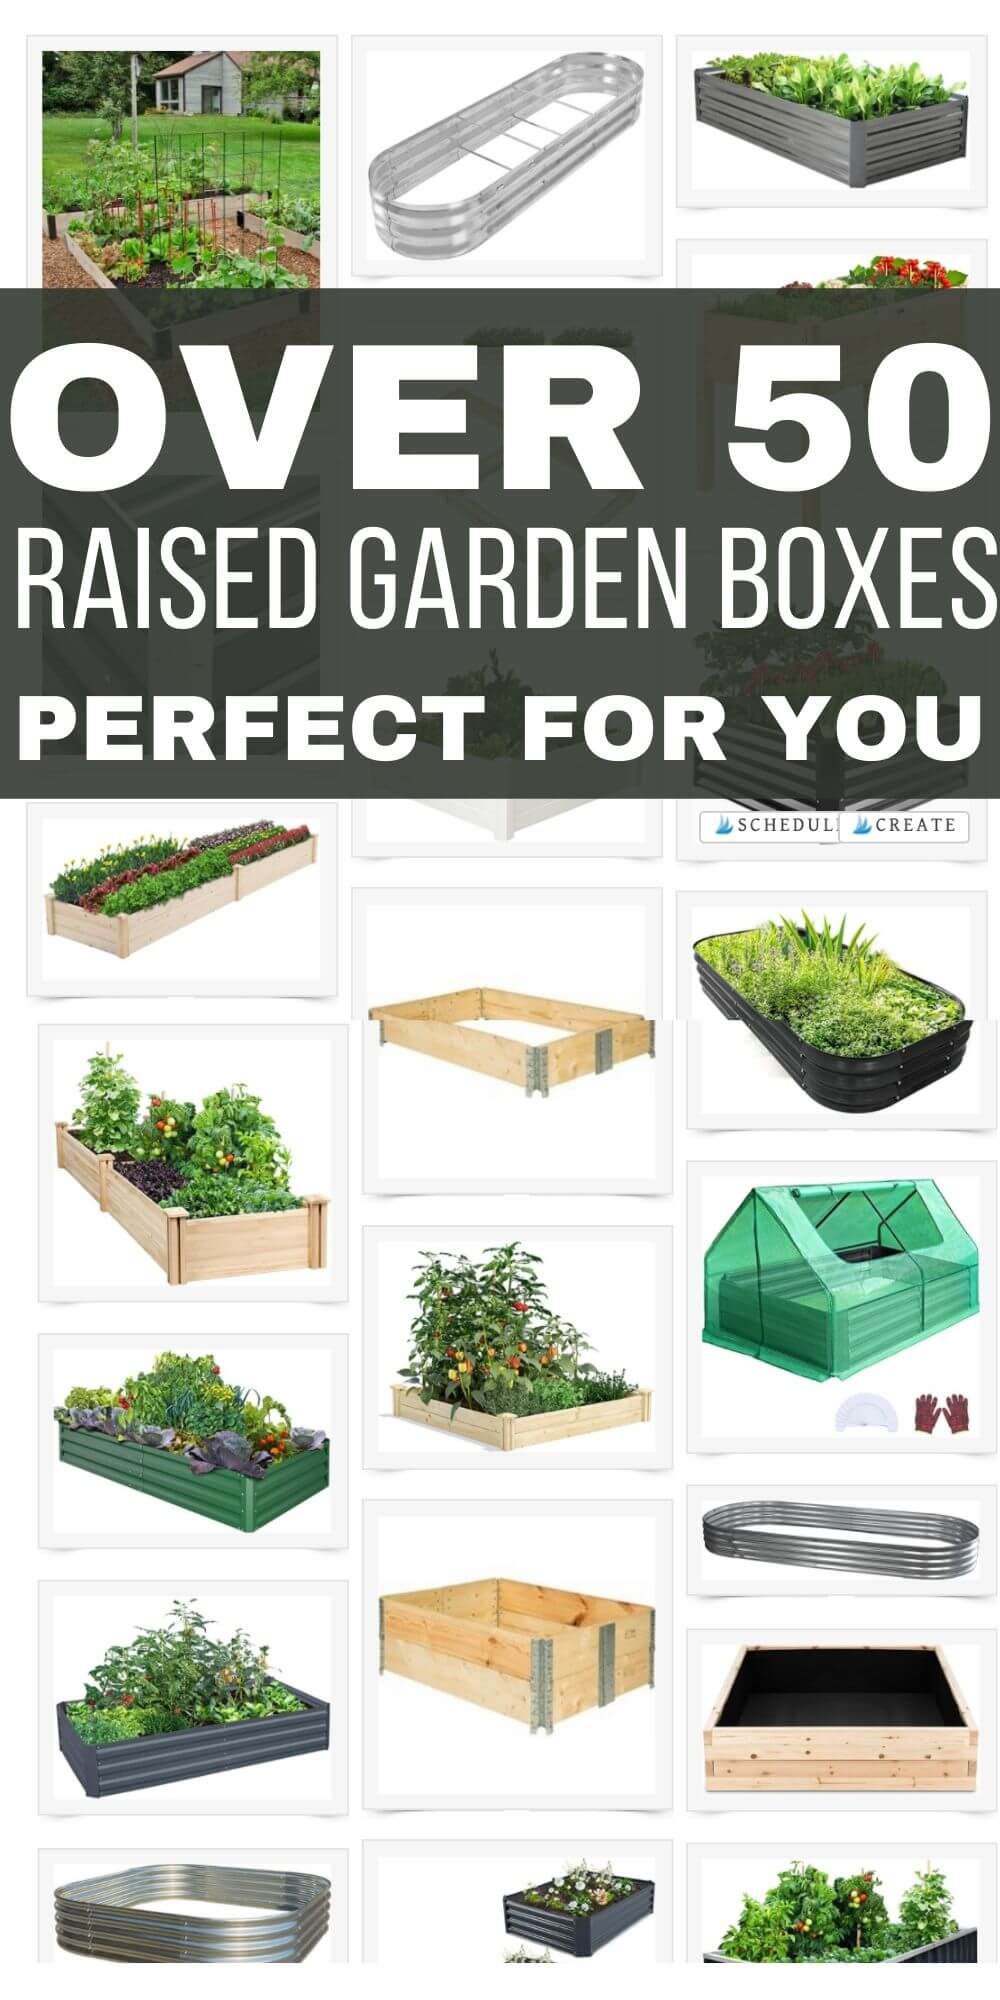 Want to start your own garden? This post has tons of gardening info including over 50 raised garden boxes perfect for your needs.